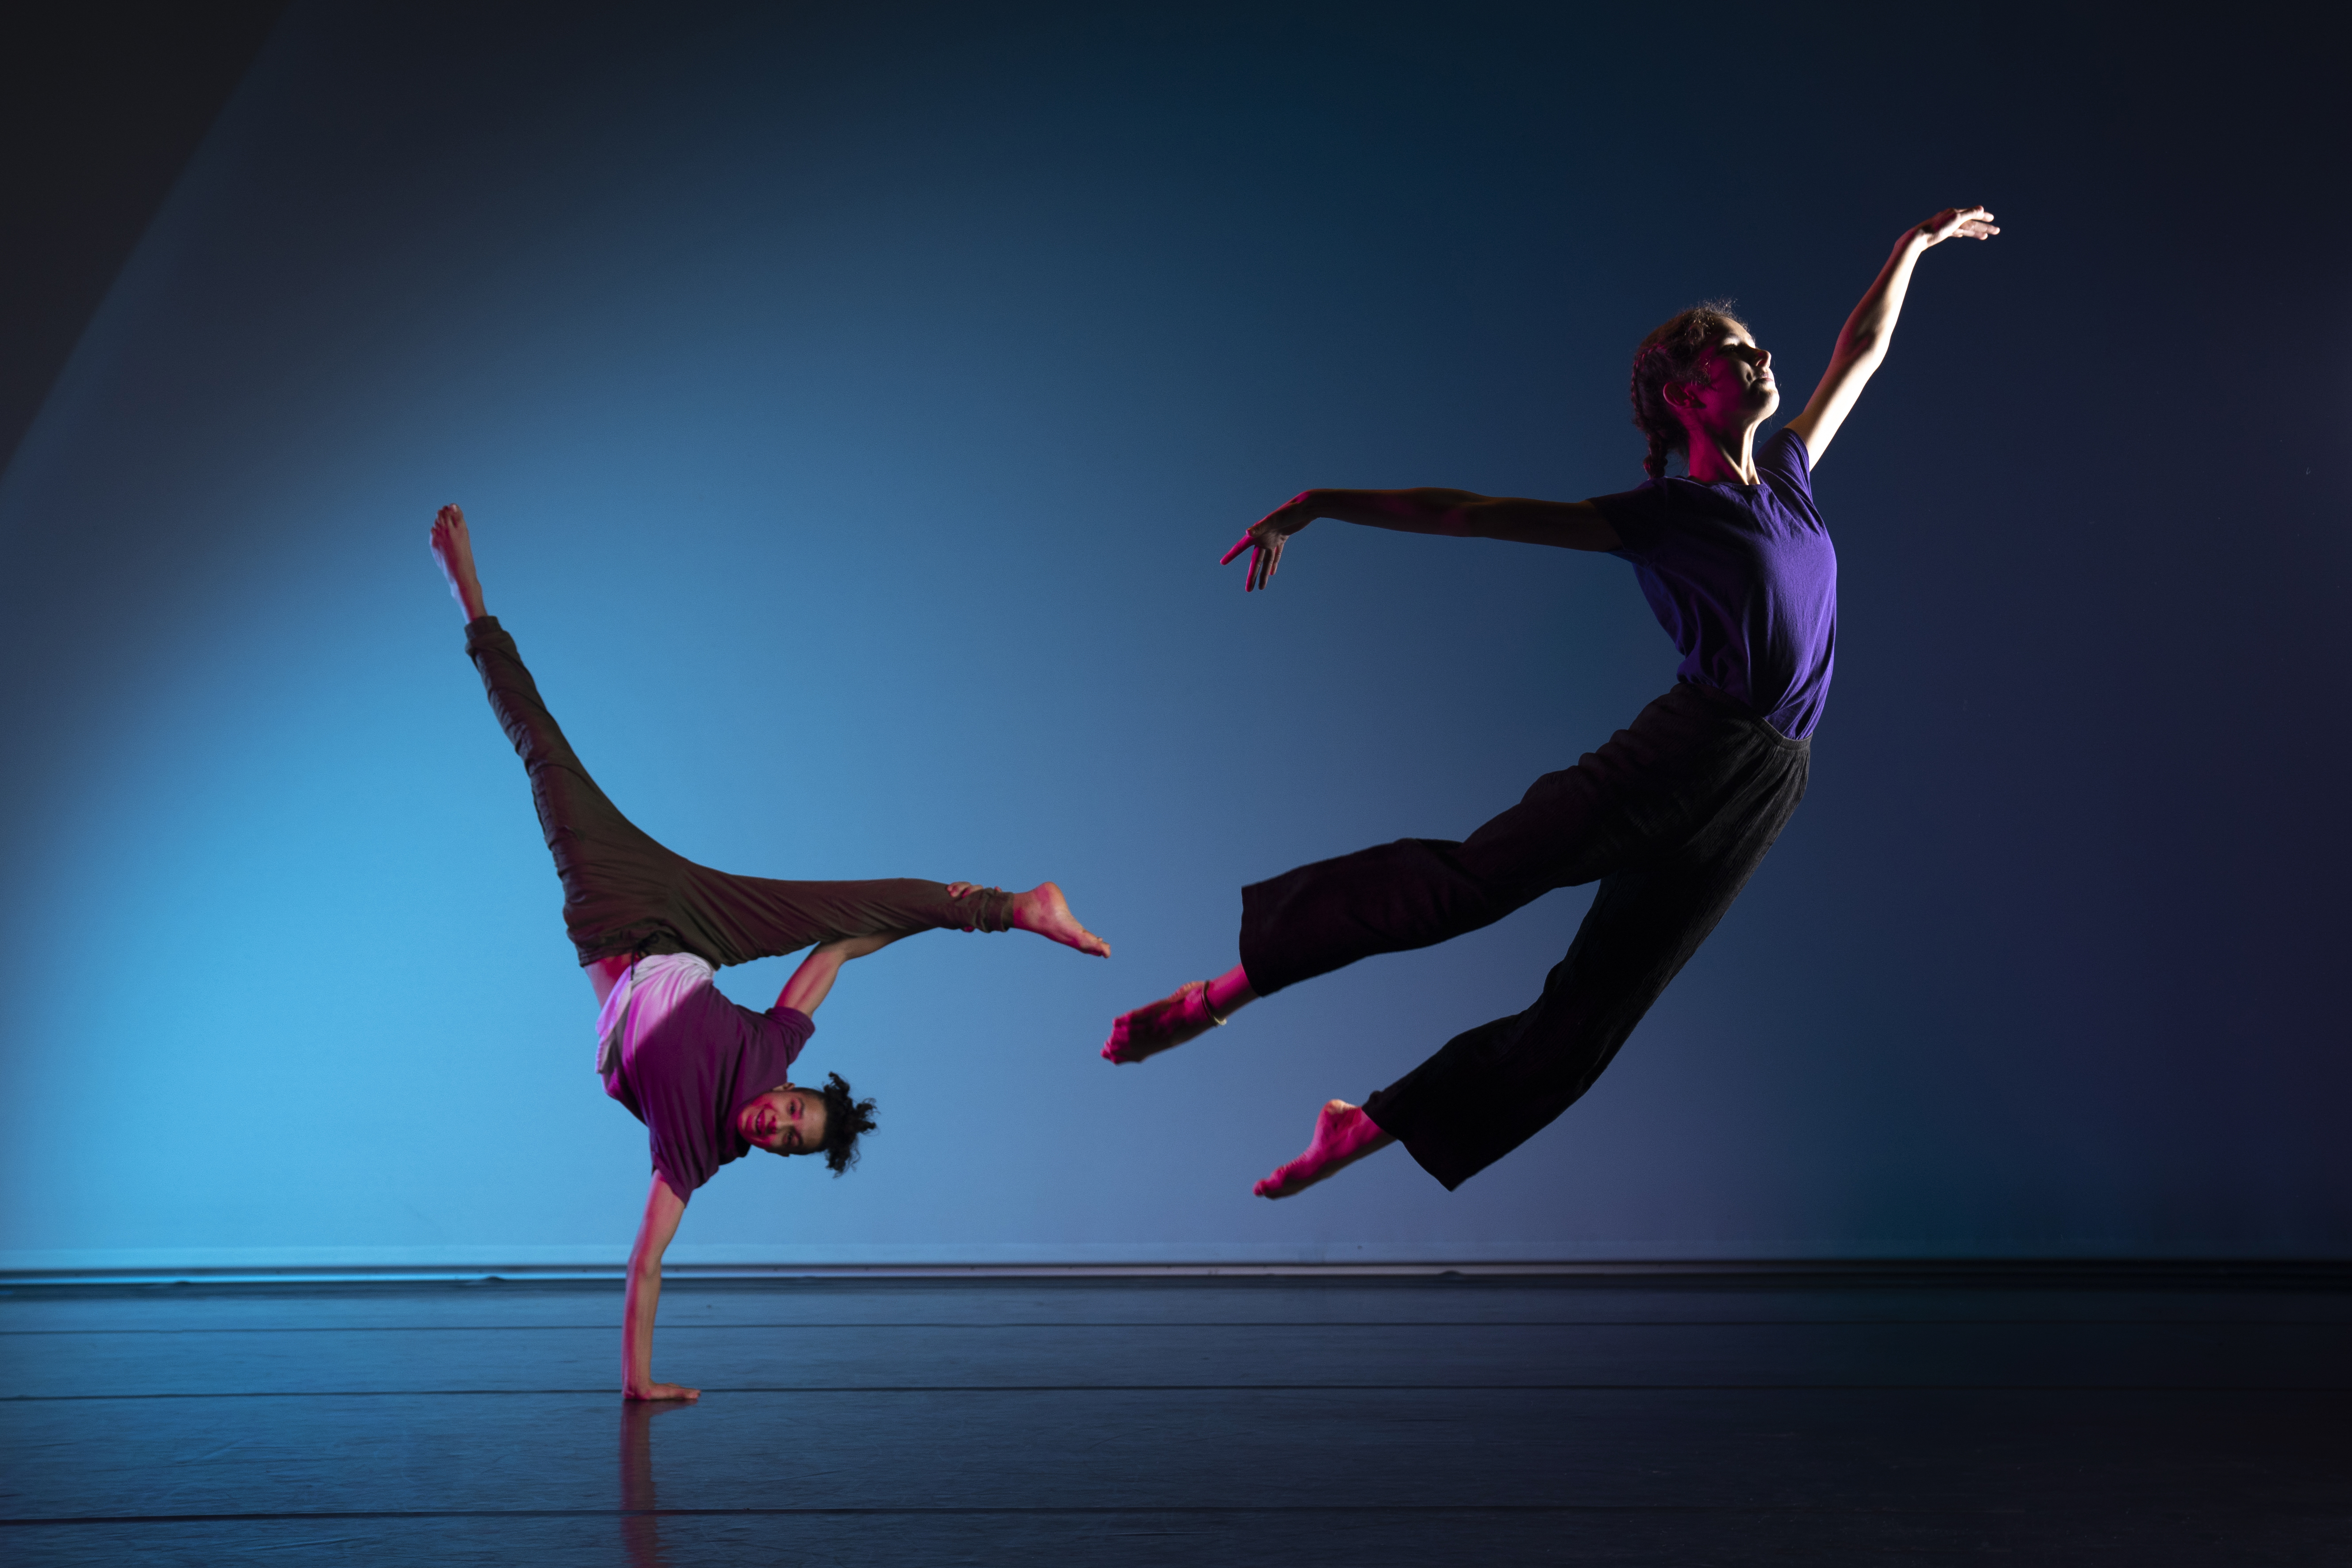 An image from a photoshoot. The background is blue and two dancers are positioned in front. One is balancing on one hand, and the other is gliding through the air. The lighting is dark and dramatic.